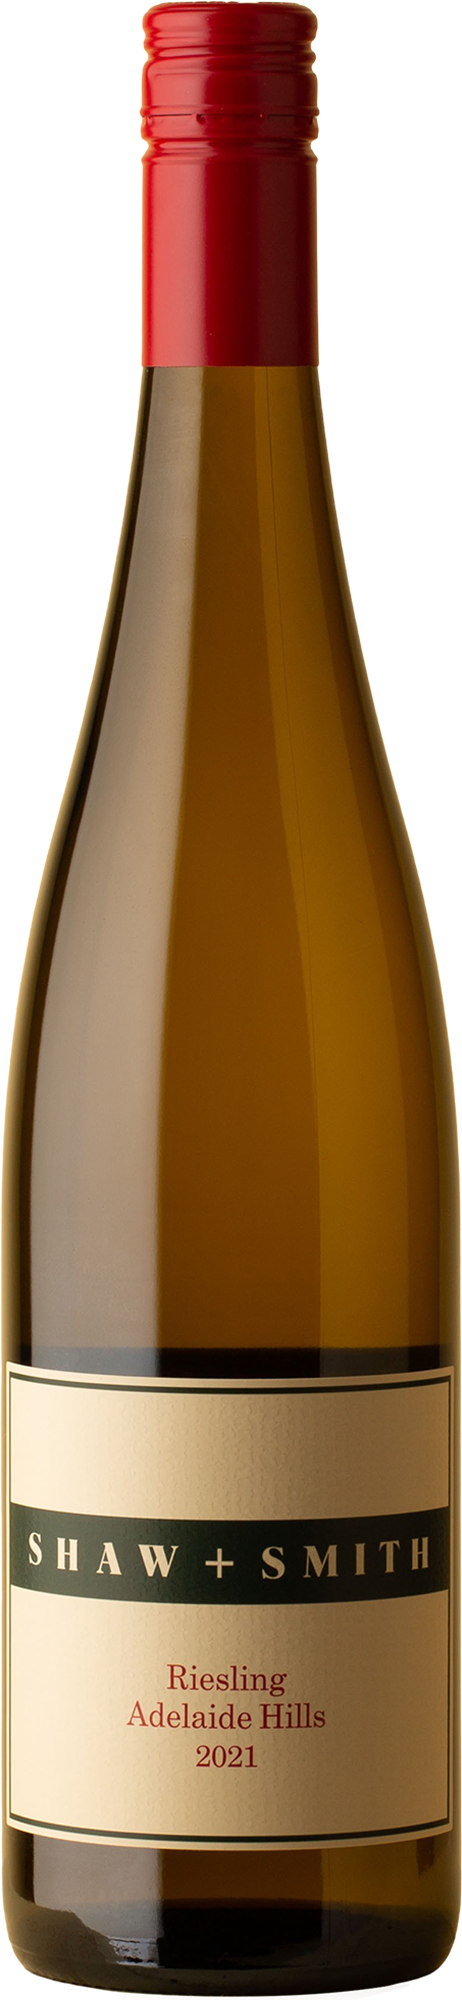 Shaw + Smith - Riesling 2021 White Wine